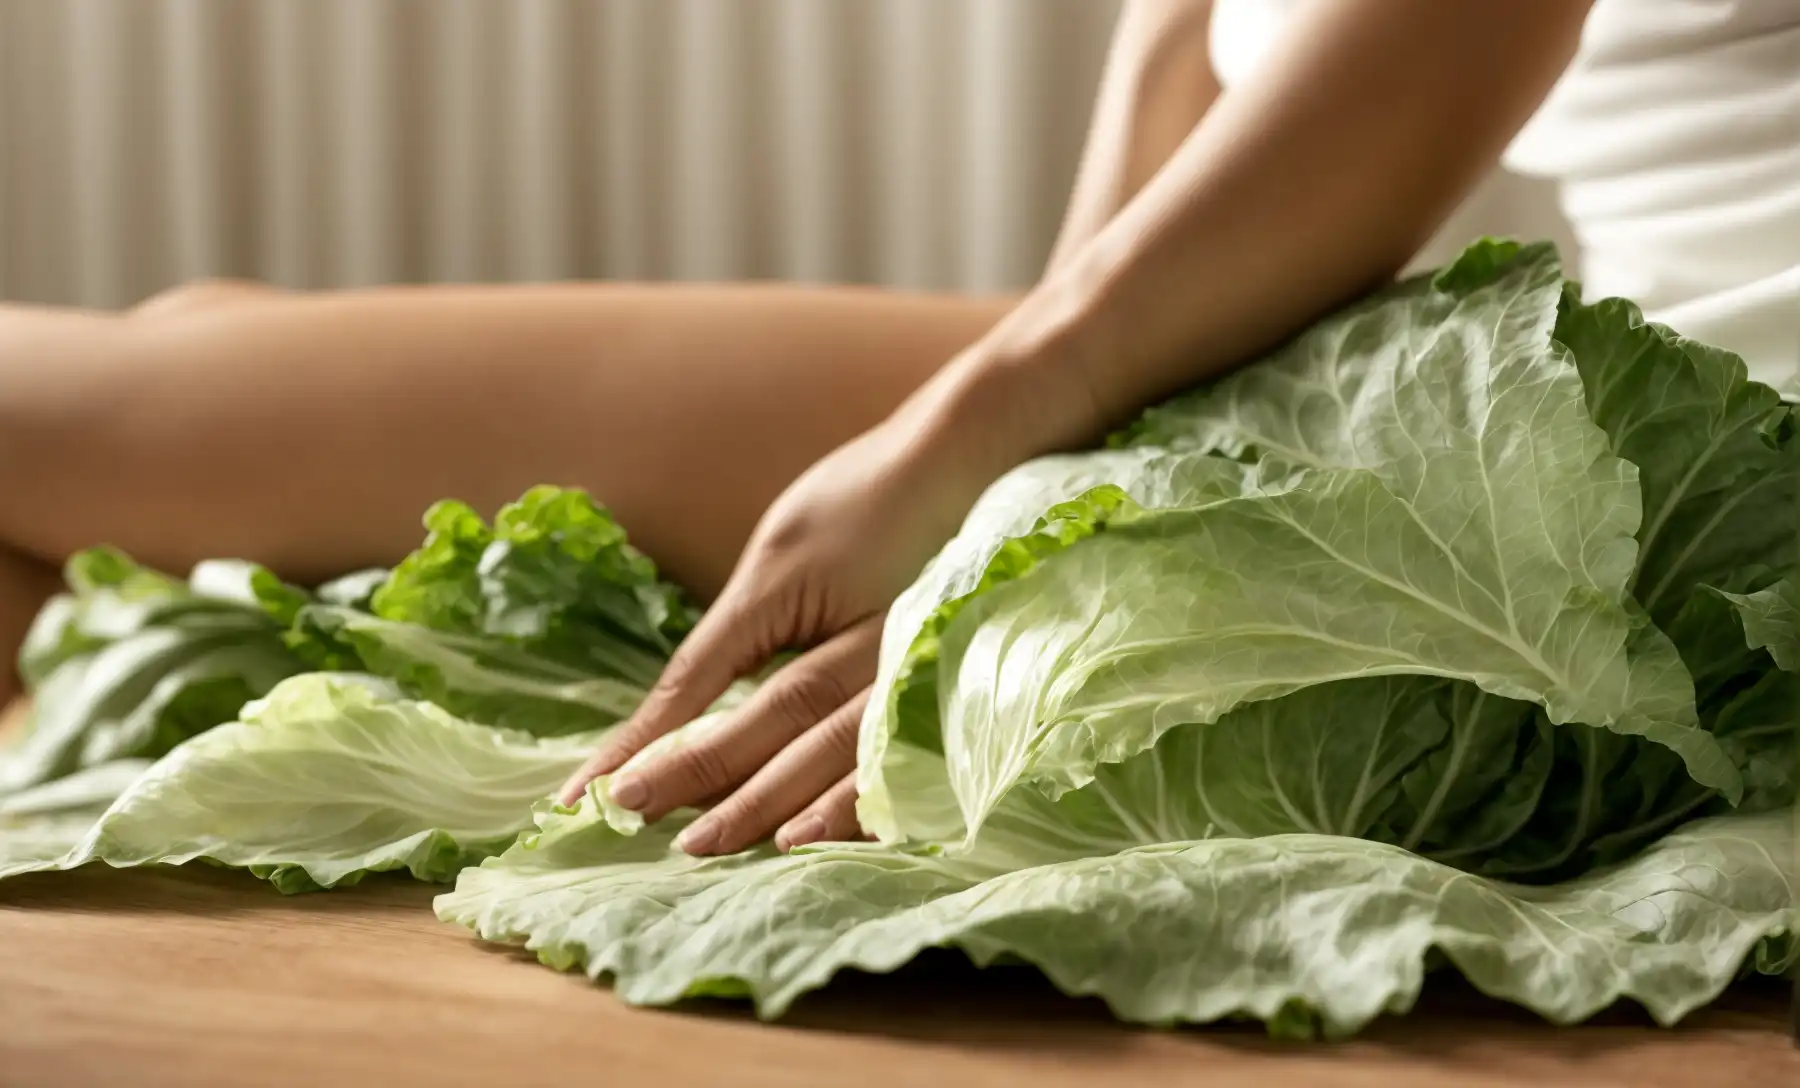 How to Use Cabbage Leaves for Joint Pain